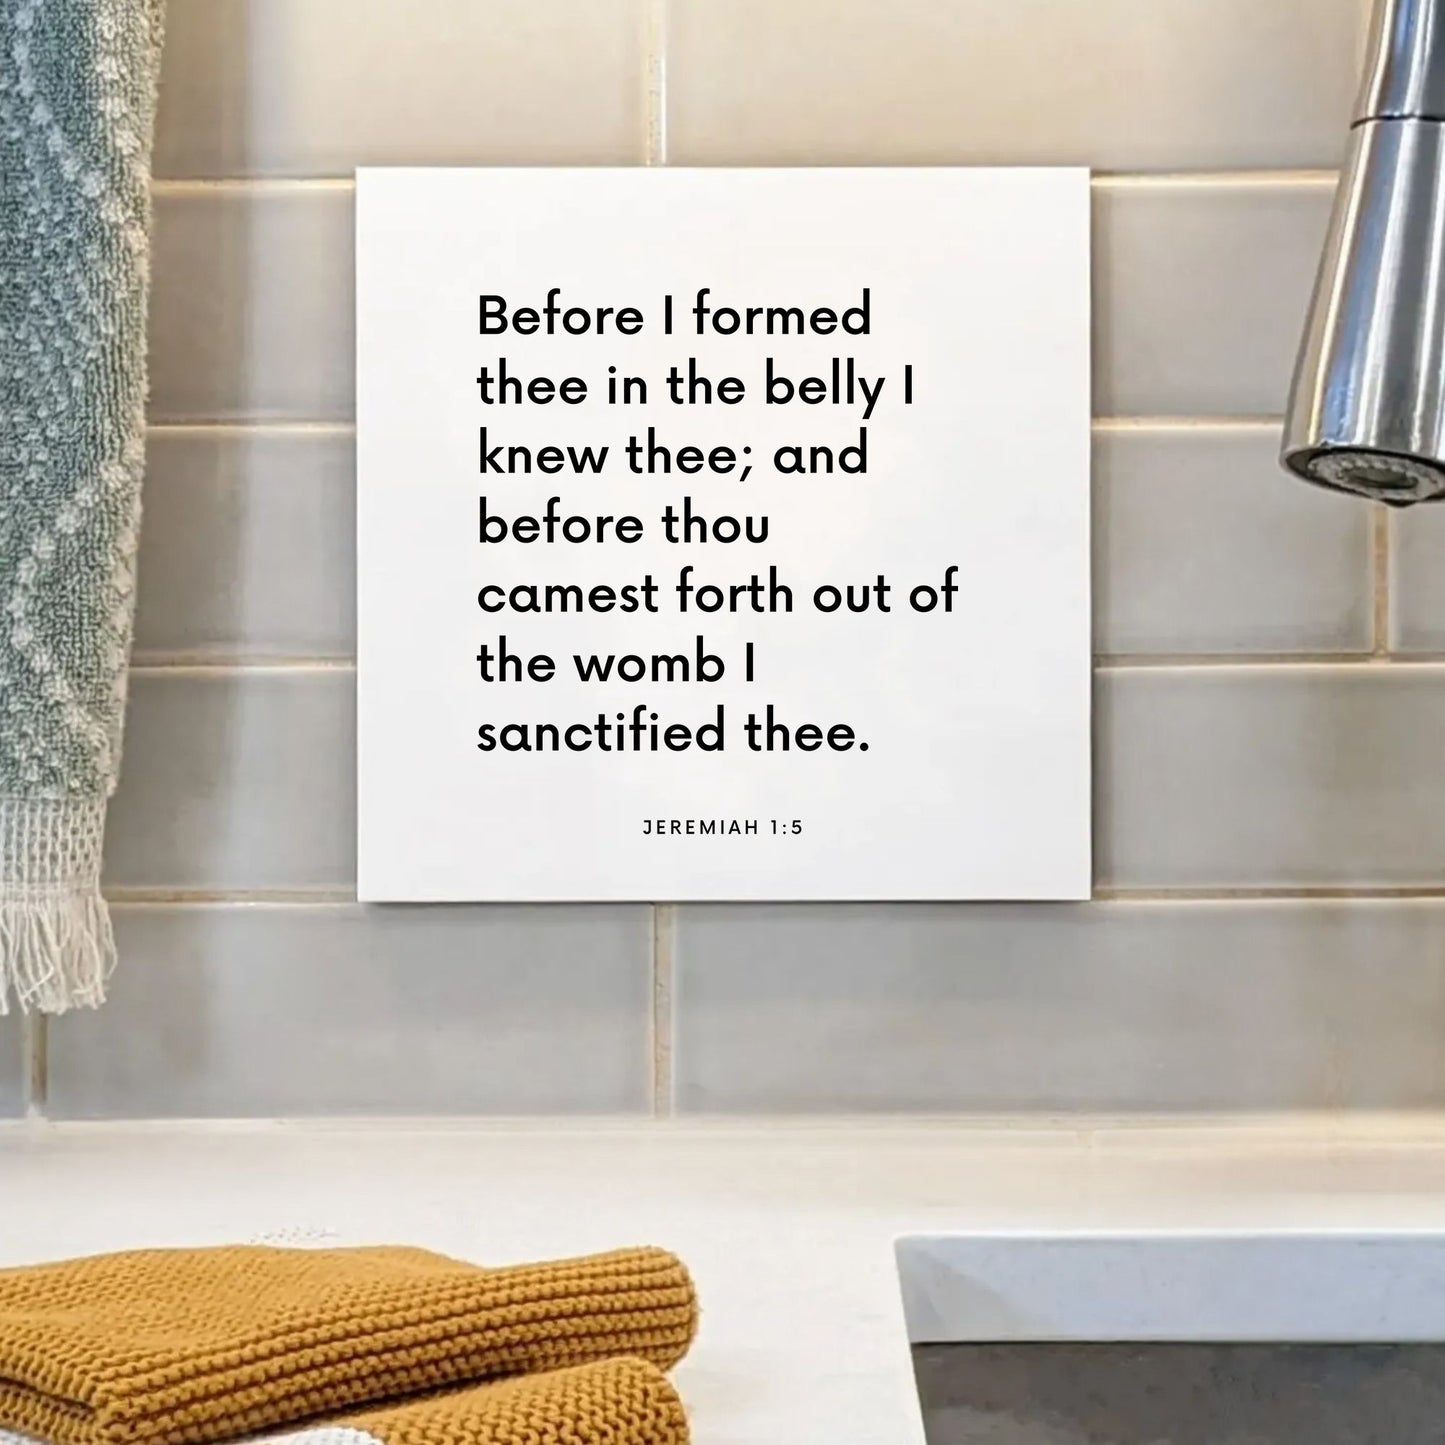 Sink mouting of the scripture tile for Jeremiah 1:5 - "Before I formed thee in the belly I knew thee"